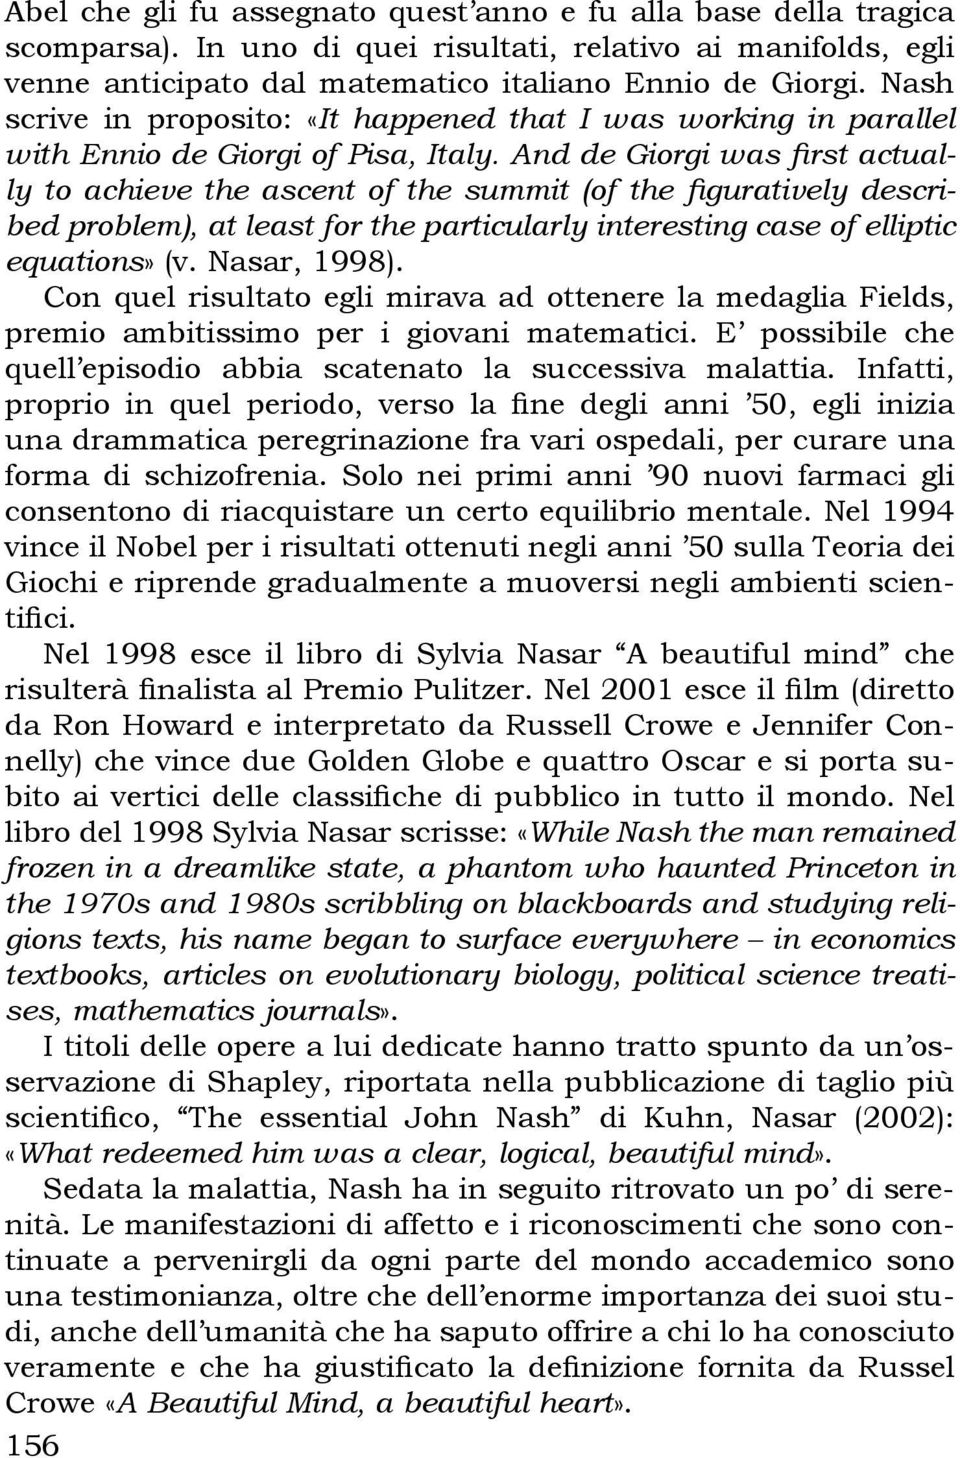 And de Giorgi was first actually to achieve the ascent of the summit (of the figuratively described problem), at least for the particularly interesting case of elliptic equations» (v. Nasar, 1998).